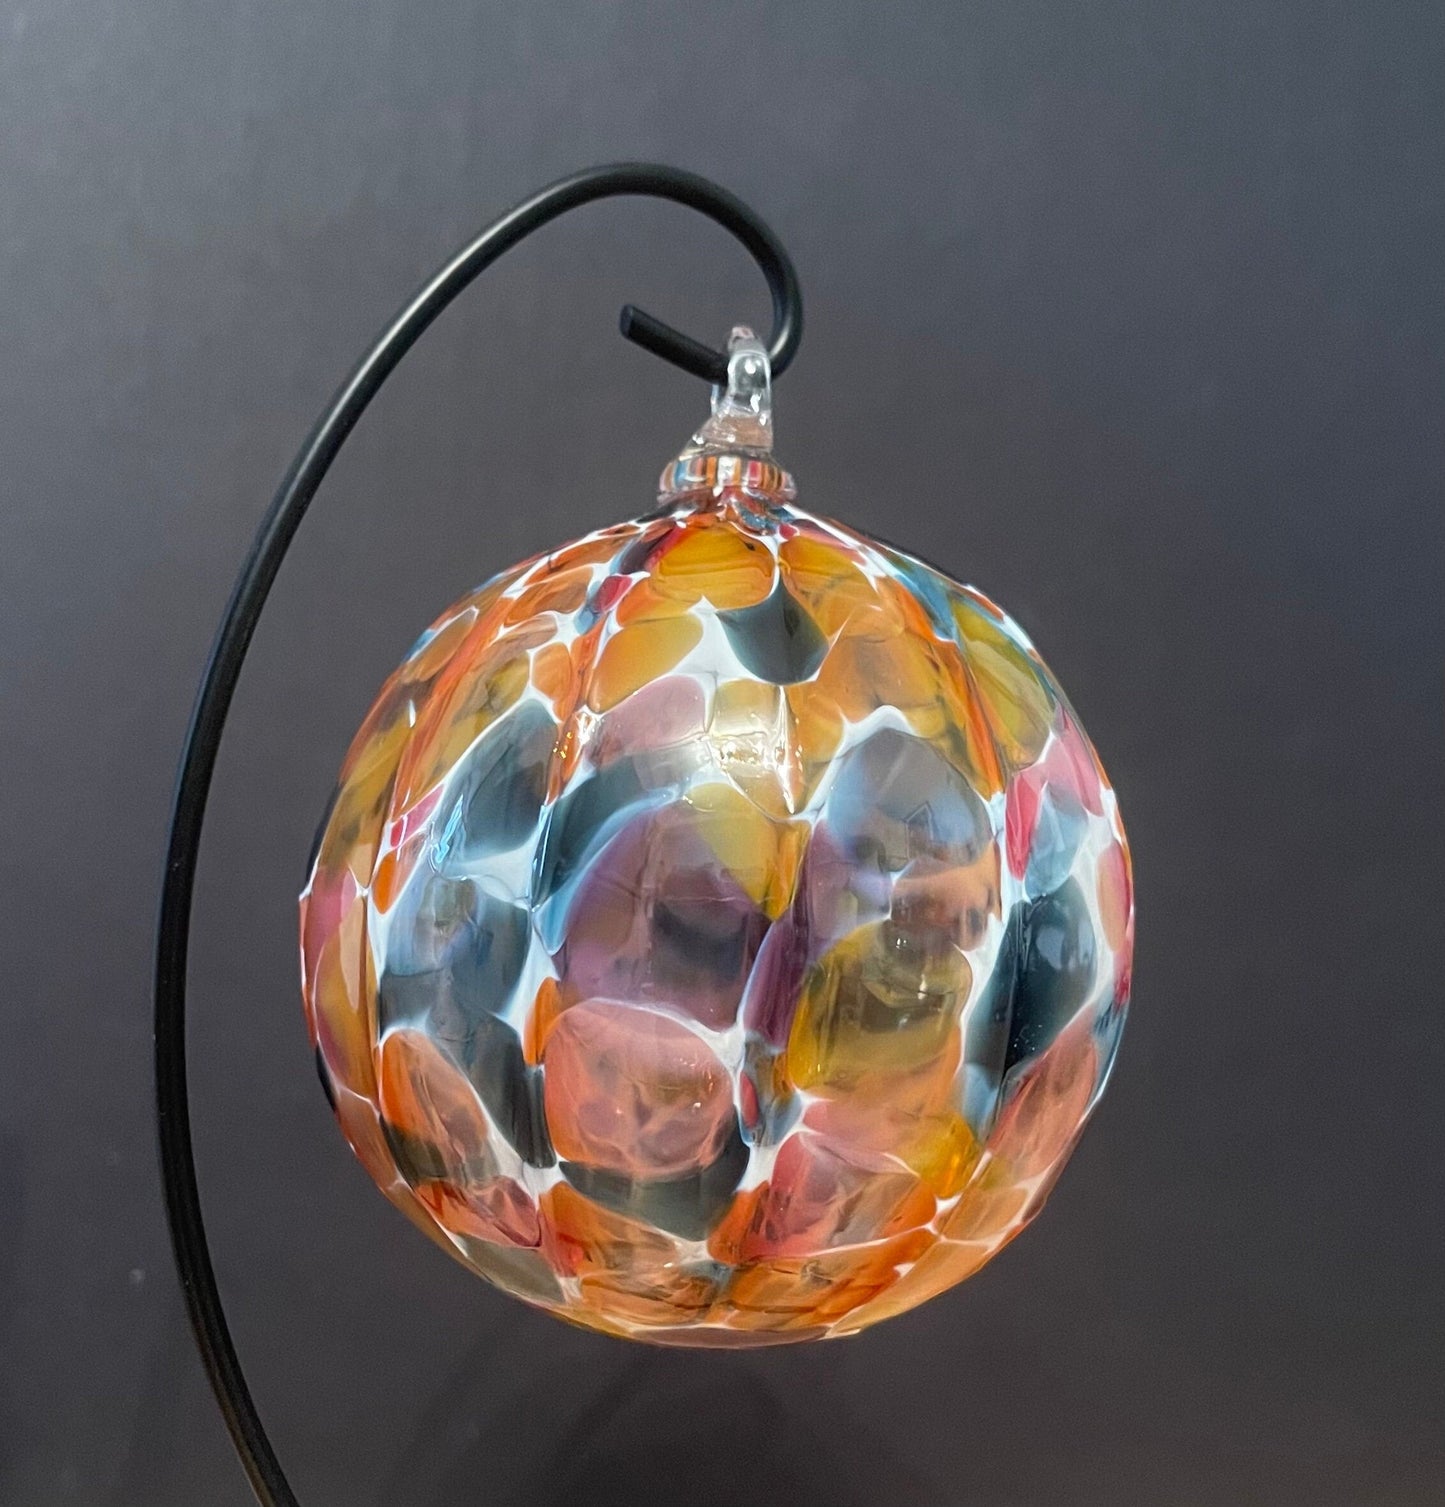 Hand Crafted Ornament Bright Mix by Boise Art Glass